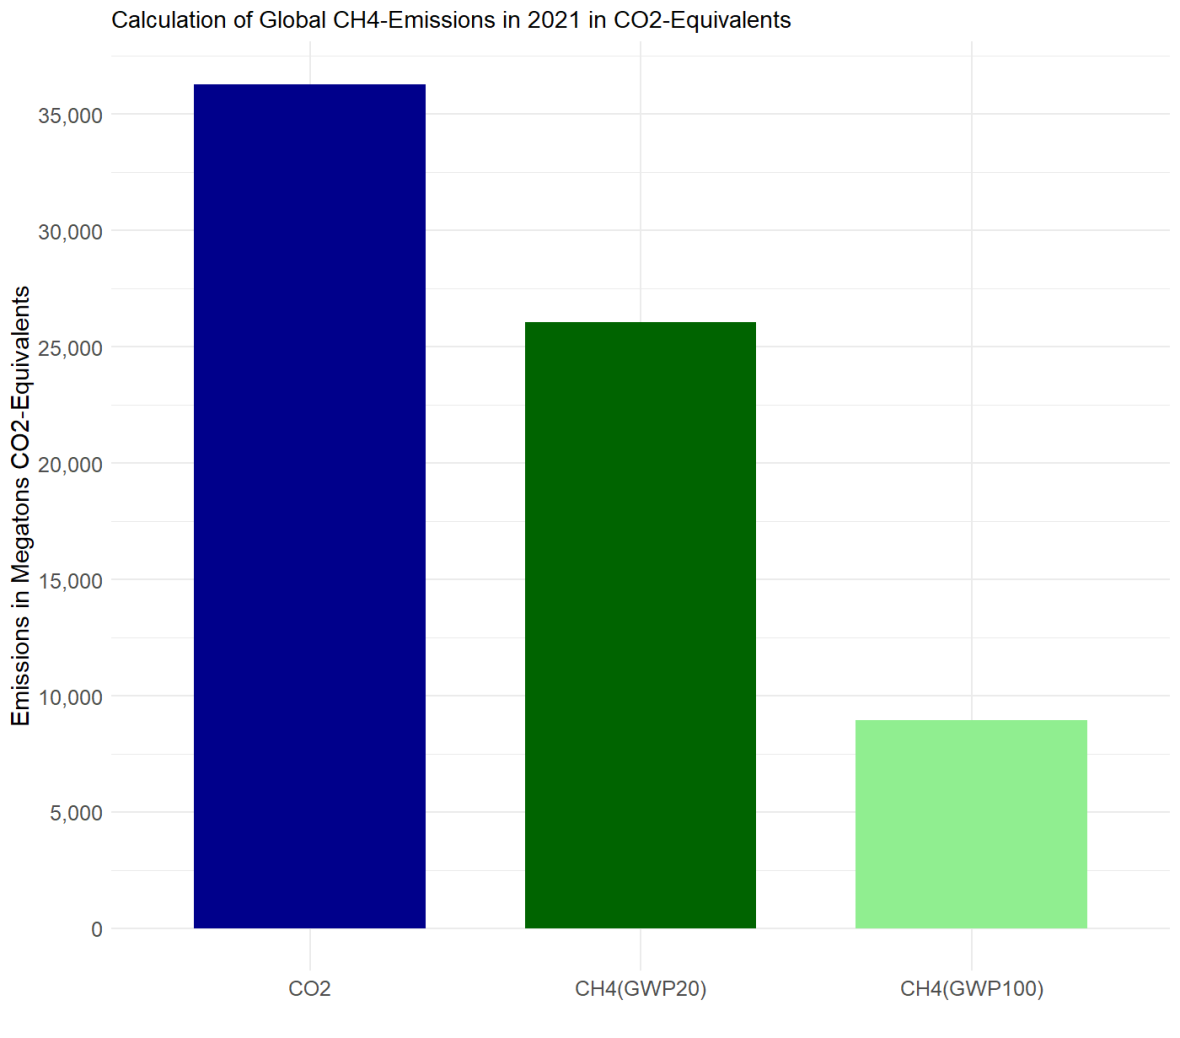 CO2 and CH4 emissions as CO2 equivalents; includes a breakdown of their global warming potentials: GWP 20 and GWP 100.